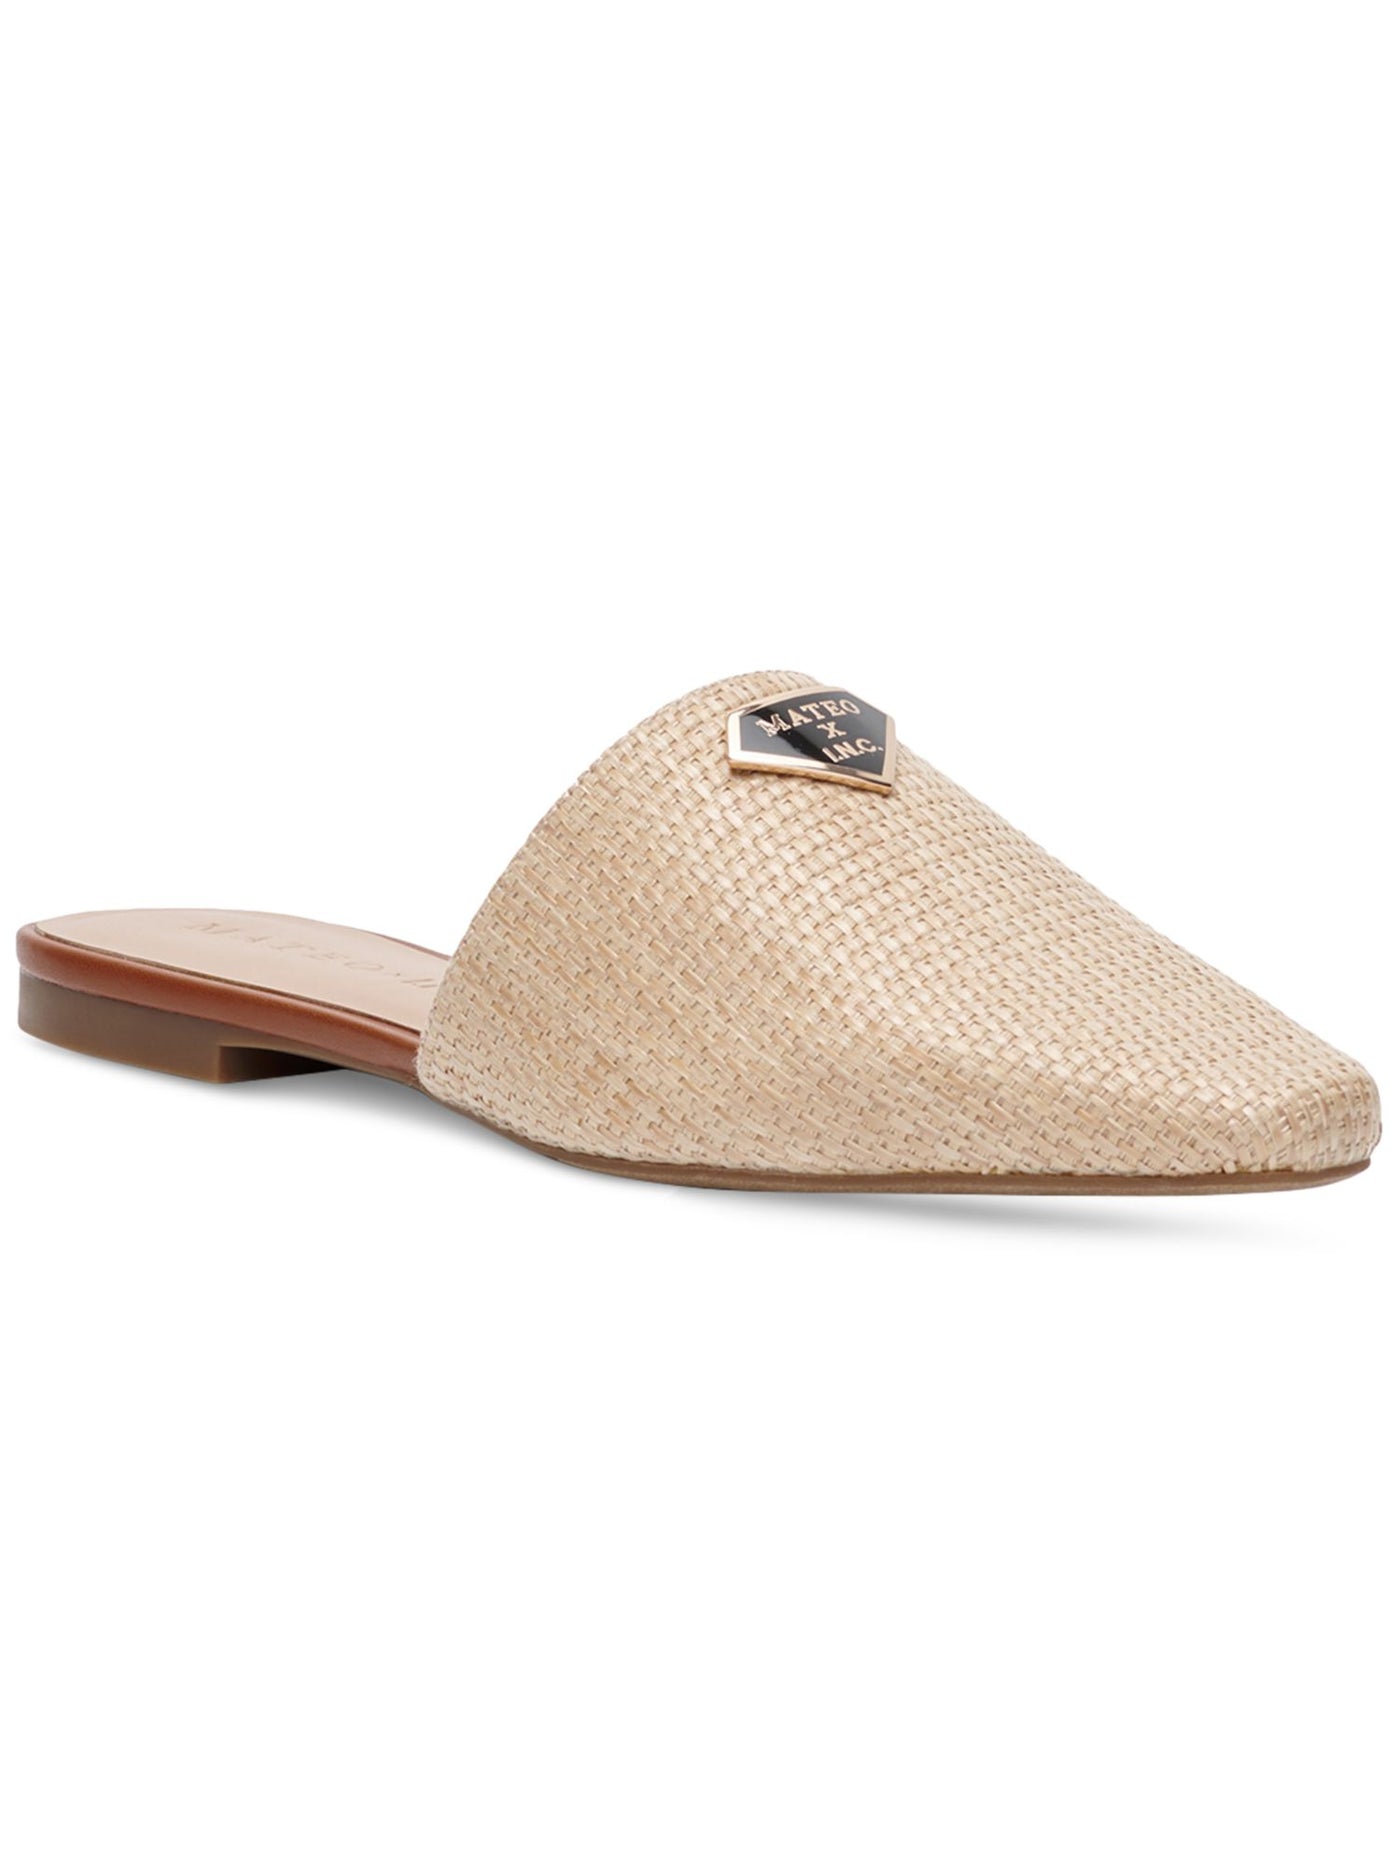 MATEO BY INC Womens Beige Woven Goring The Negril Square Toe Slip On Mules 5 M